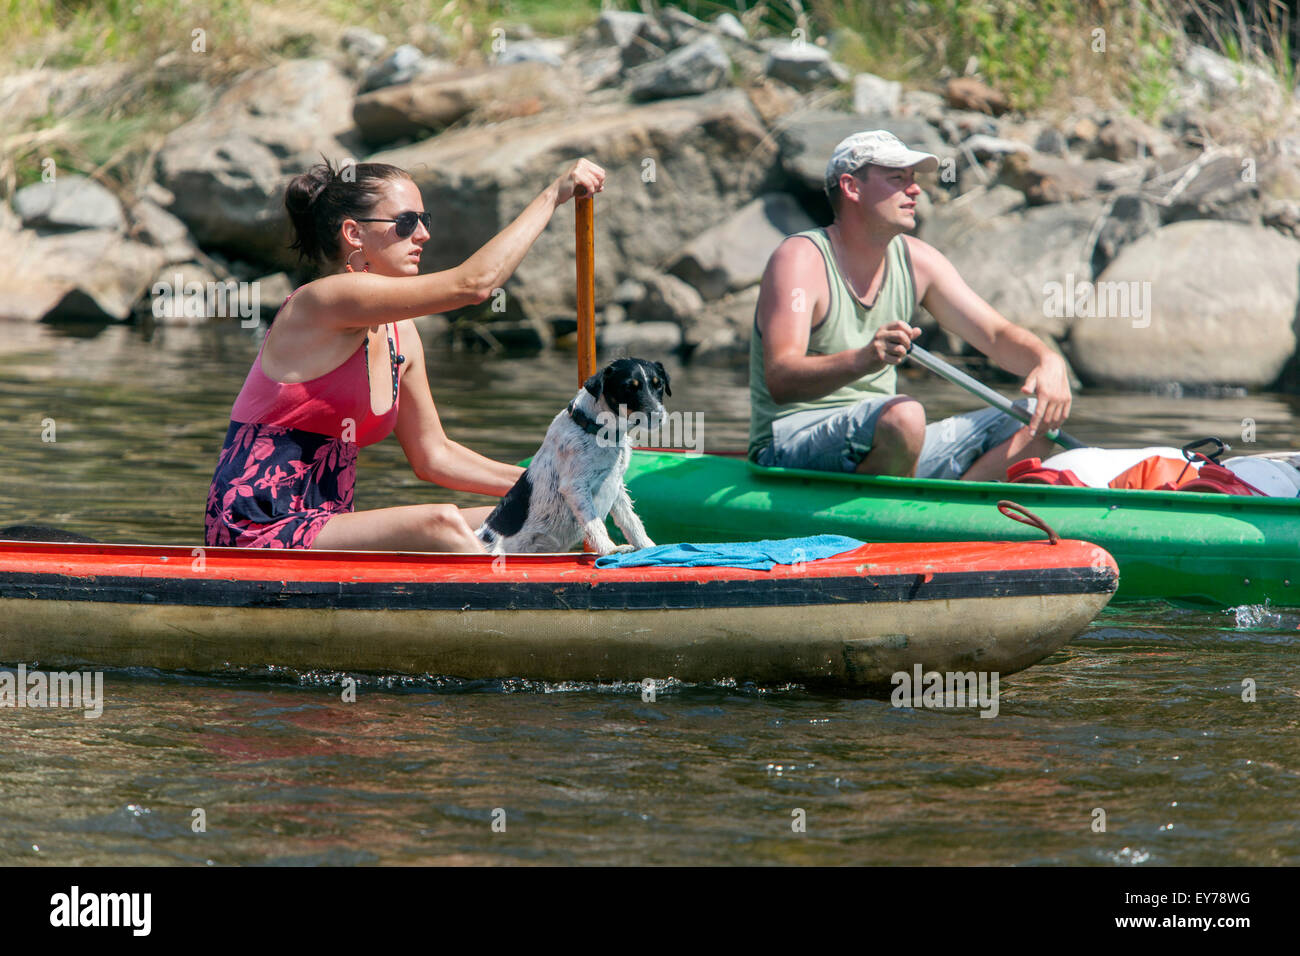 Going down by  the Vltava river, woman canoeing with a dog, South Bohemia, Czech Republic Stock Photo